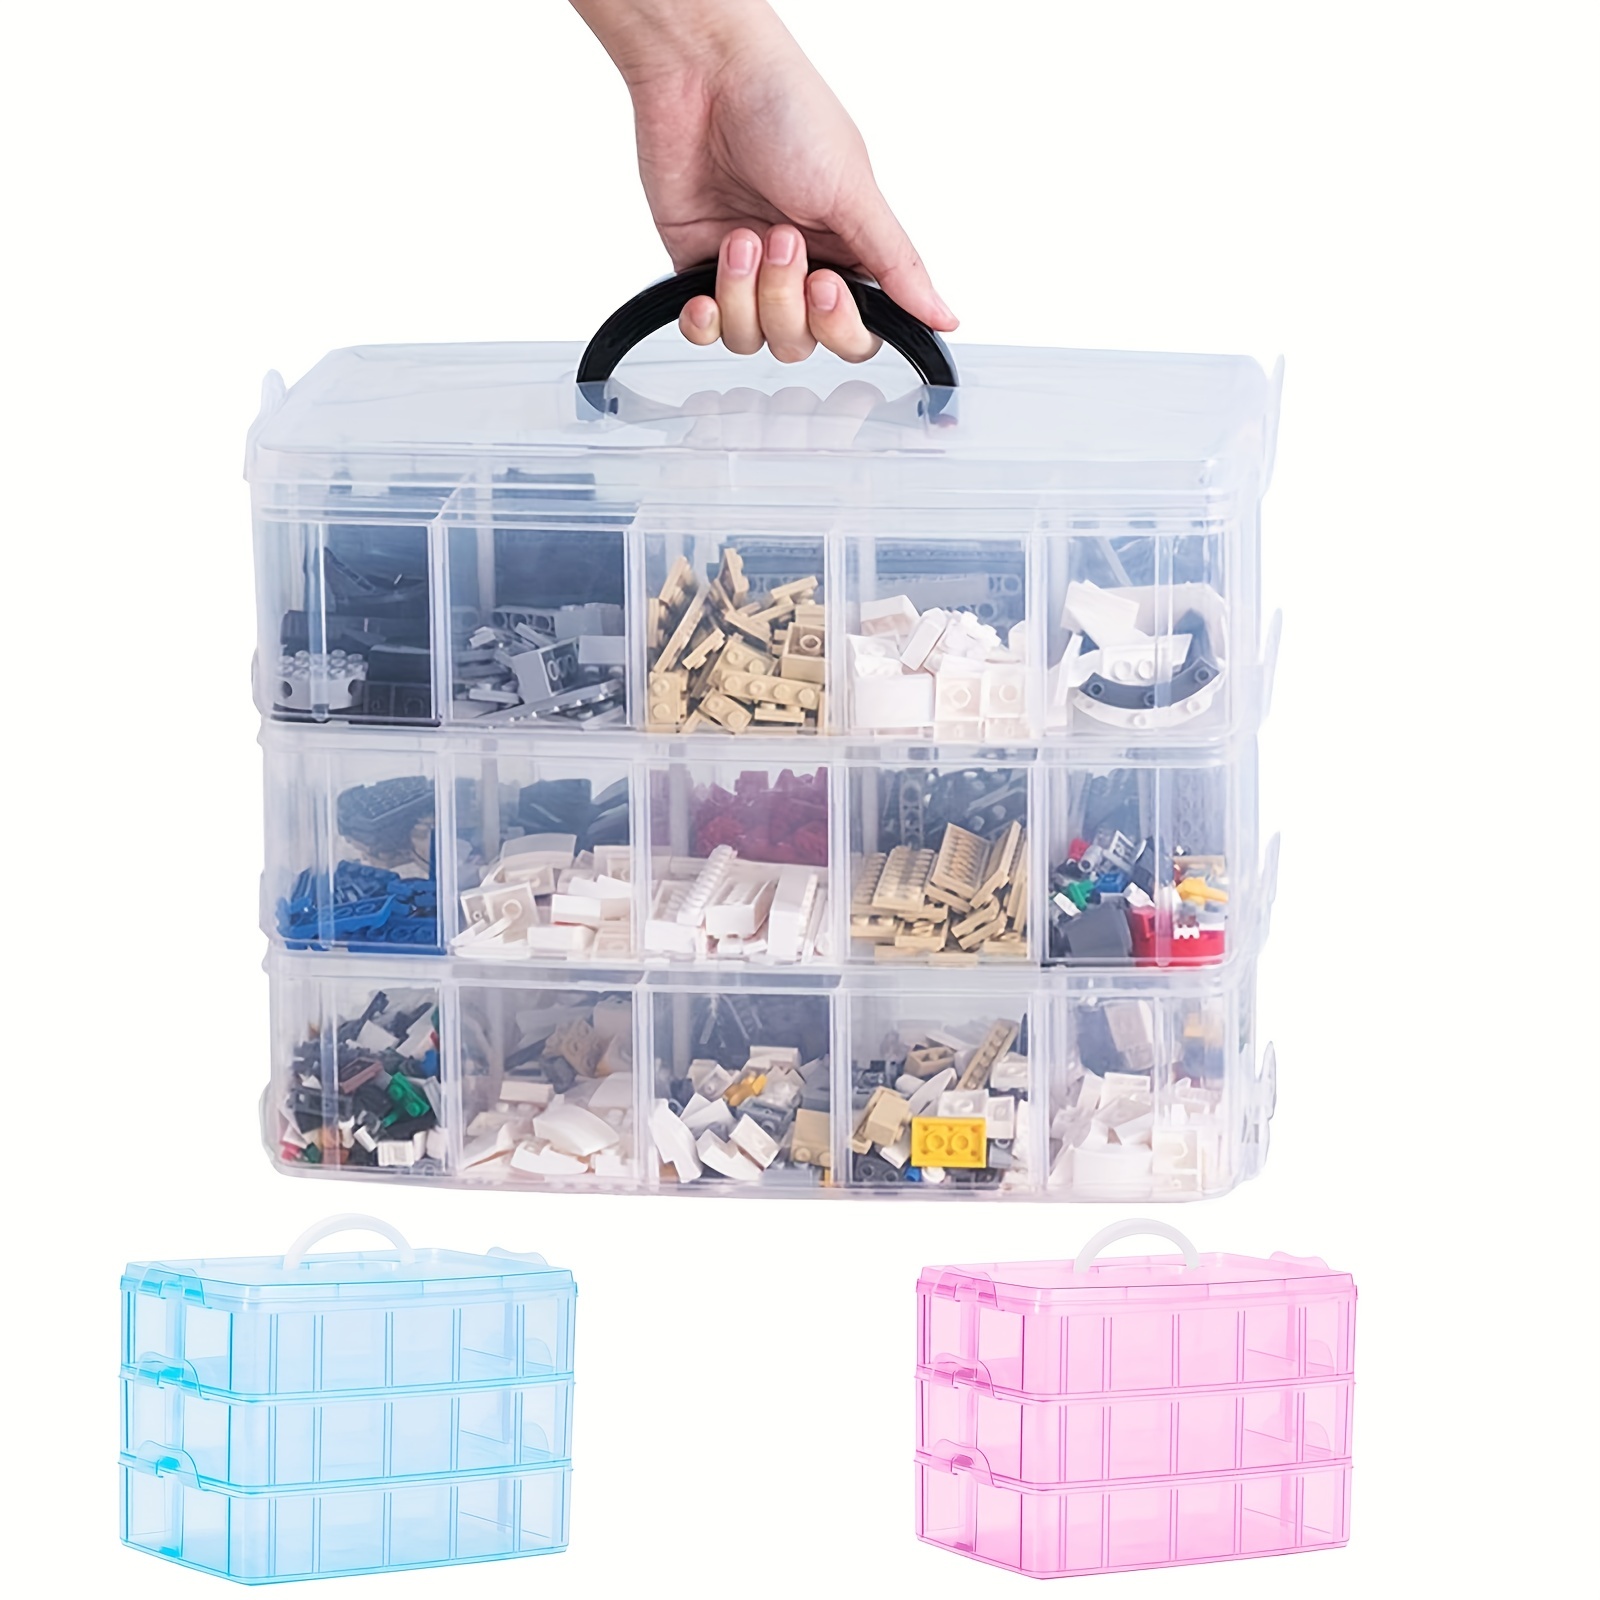 Sooyee 3-Layer Things & Crafts Storage Box with 30 Adjustable Compartments  for Organizing Washi Tape, Embroidery Accessories, Threads Bobbins, Kids